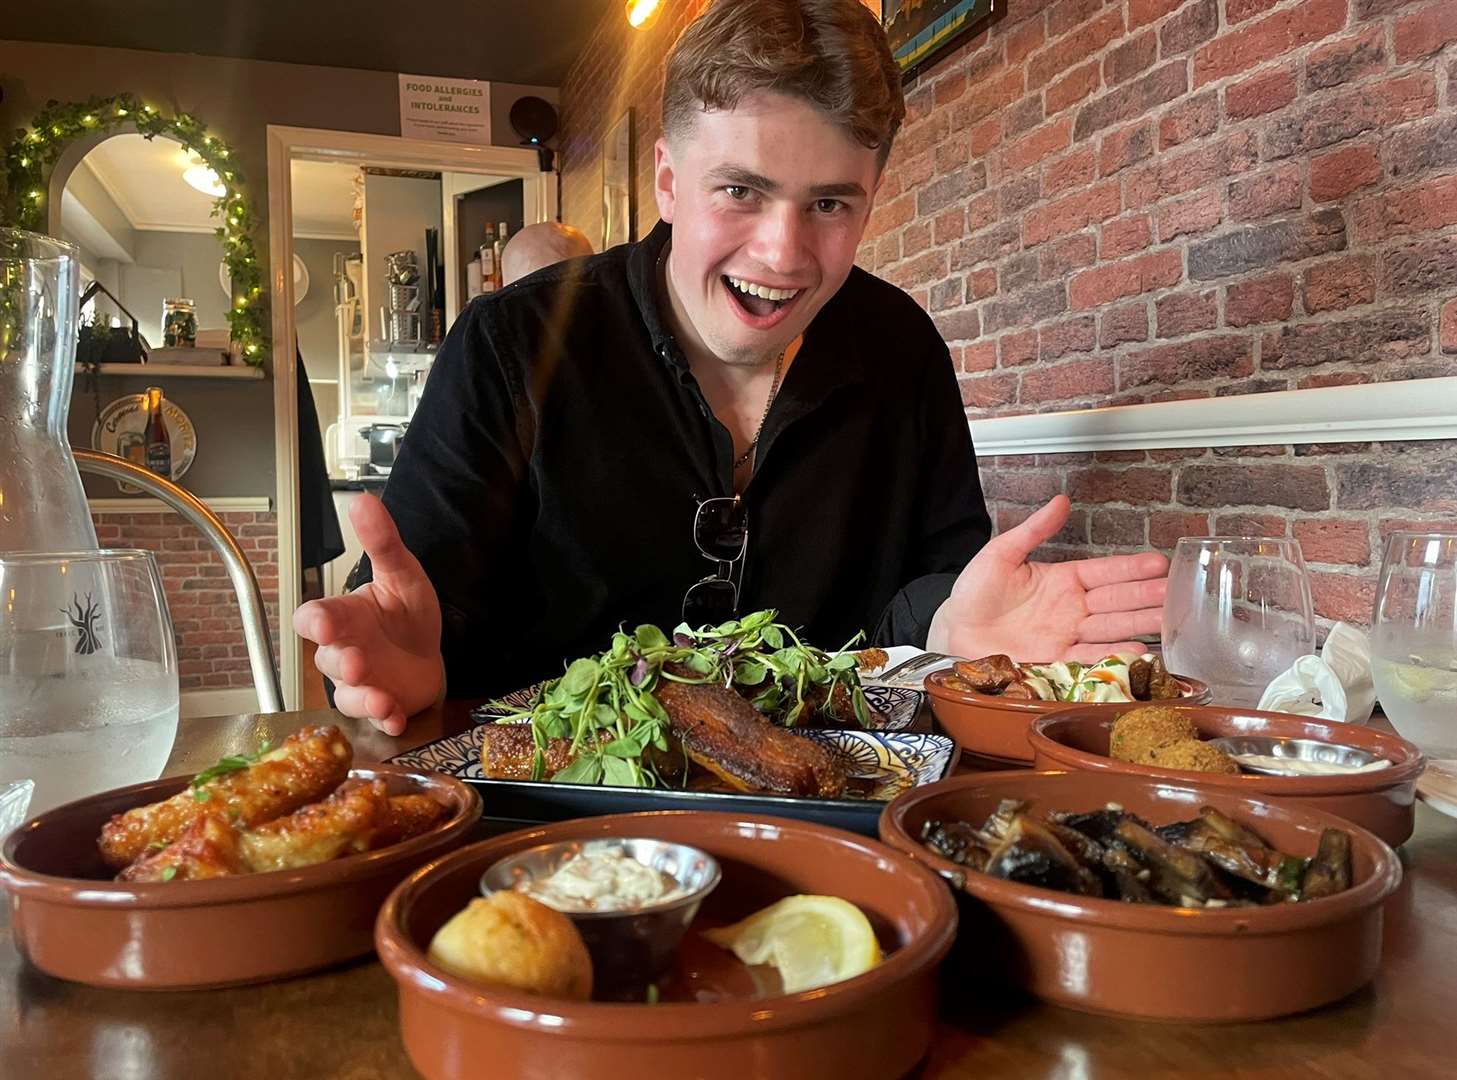 Reporter Joe Crossley surrounded by plates during a visit to West Street Tapas in Queenborough